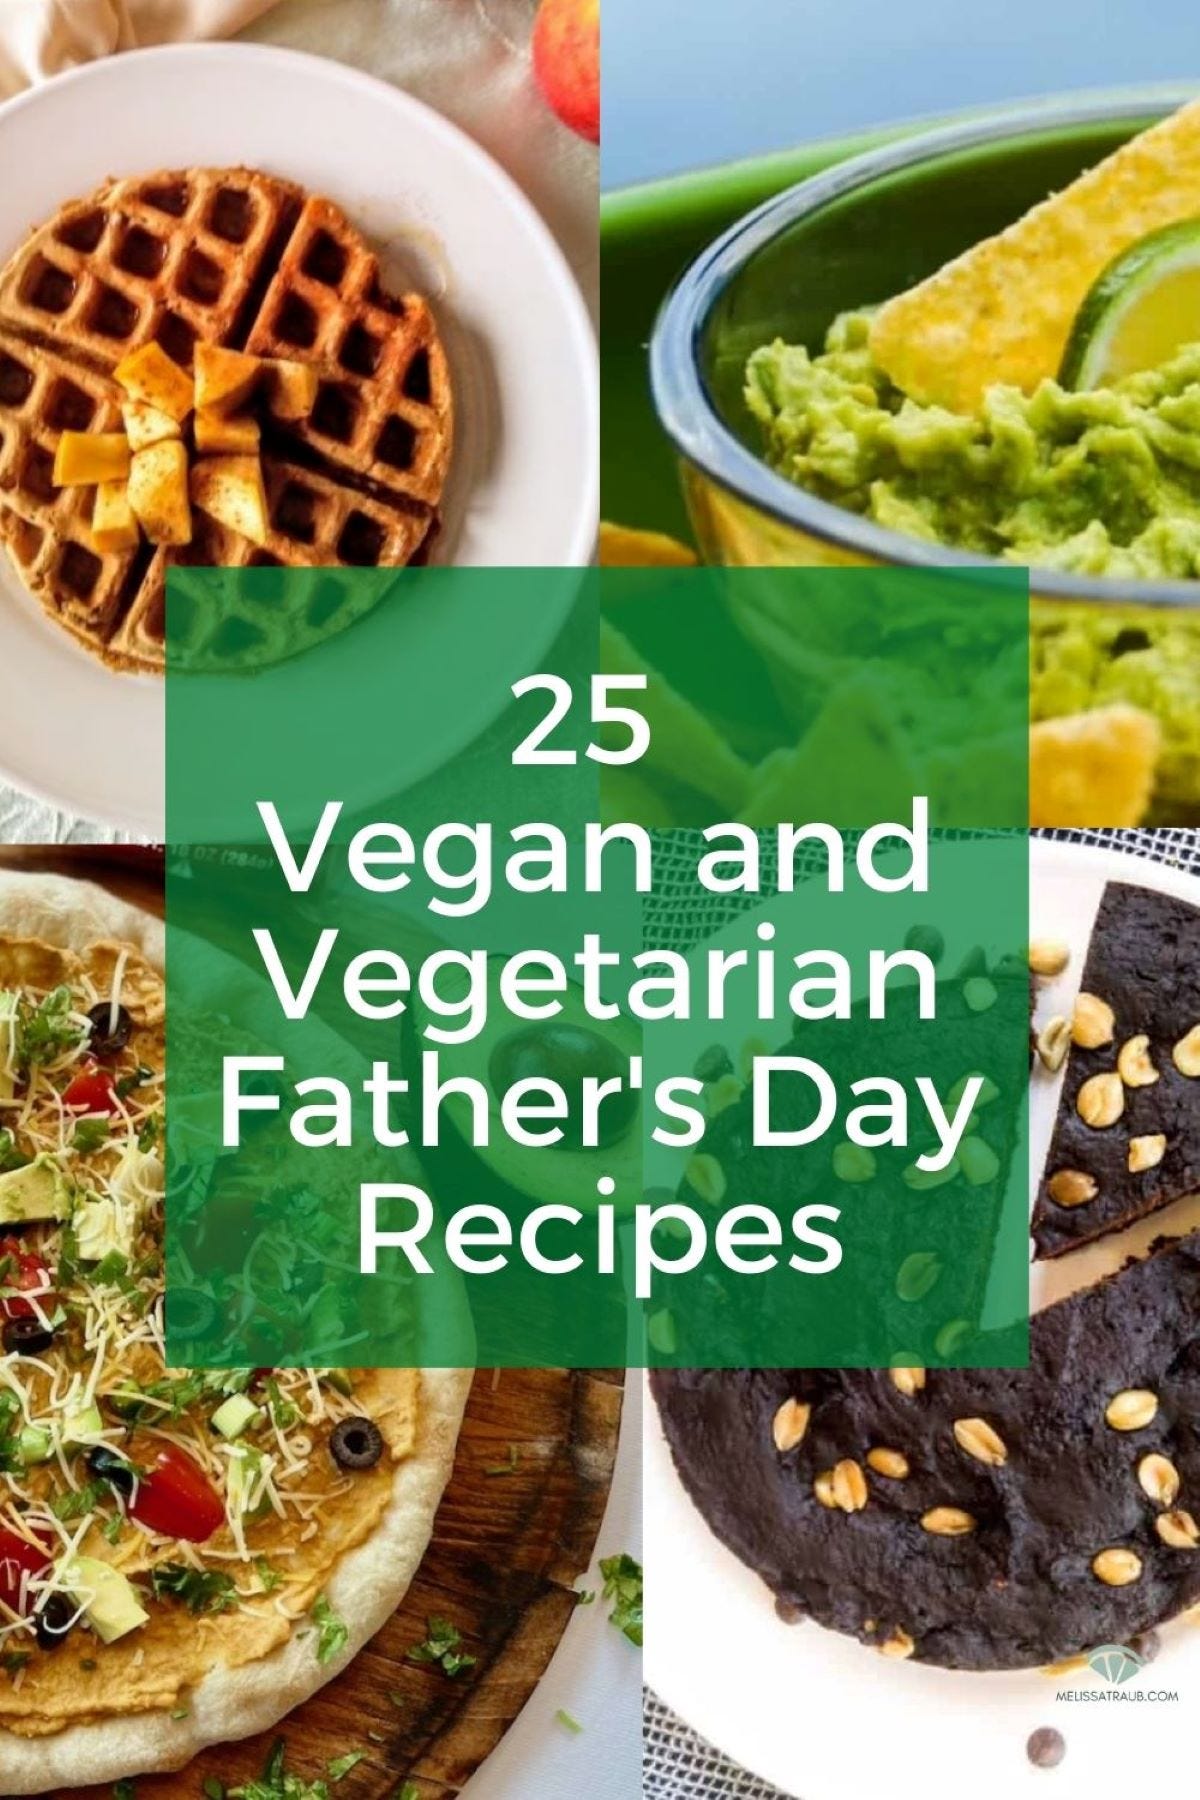 25 vegan and vegetarian father's day recipes with waffle, suacamole, taco pizza, and brownies